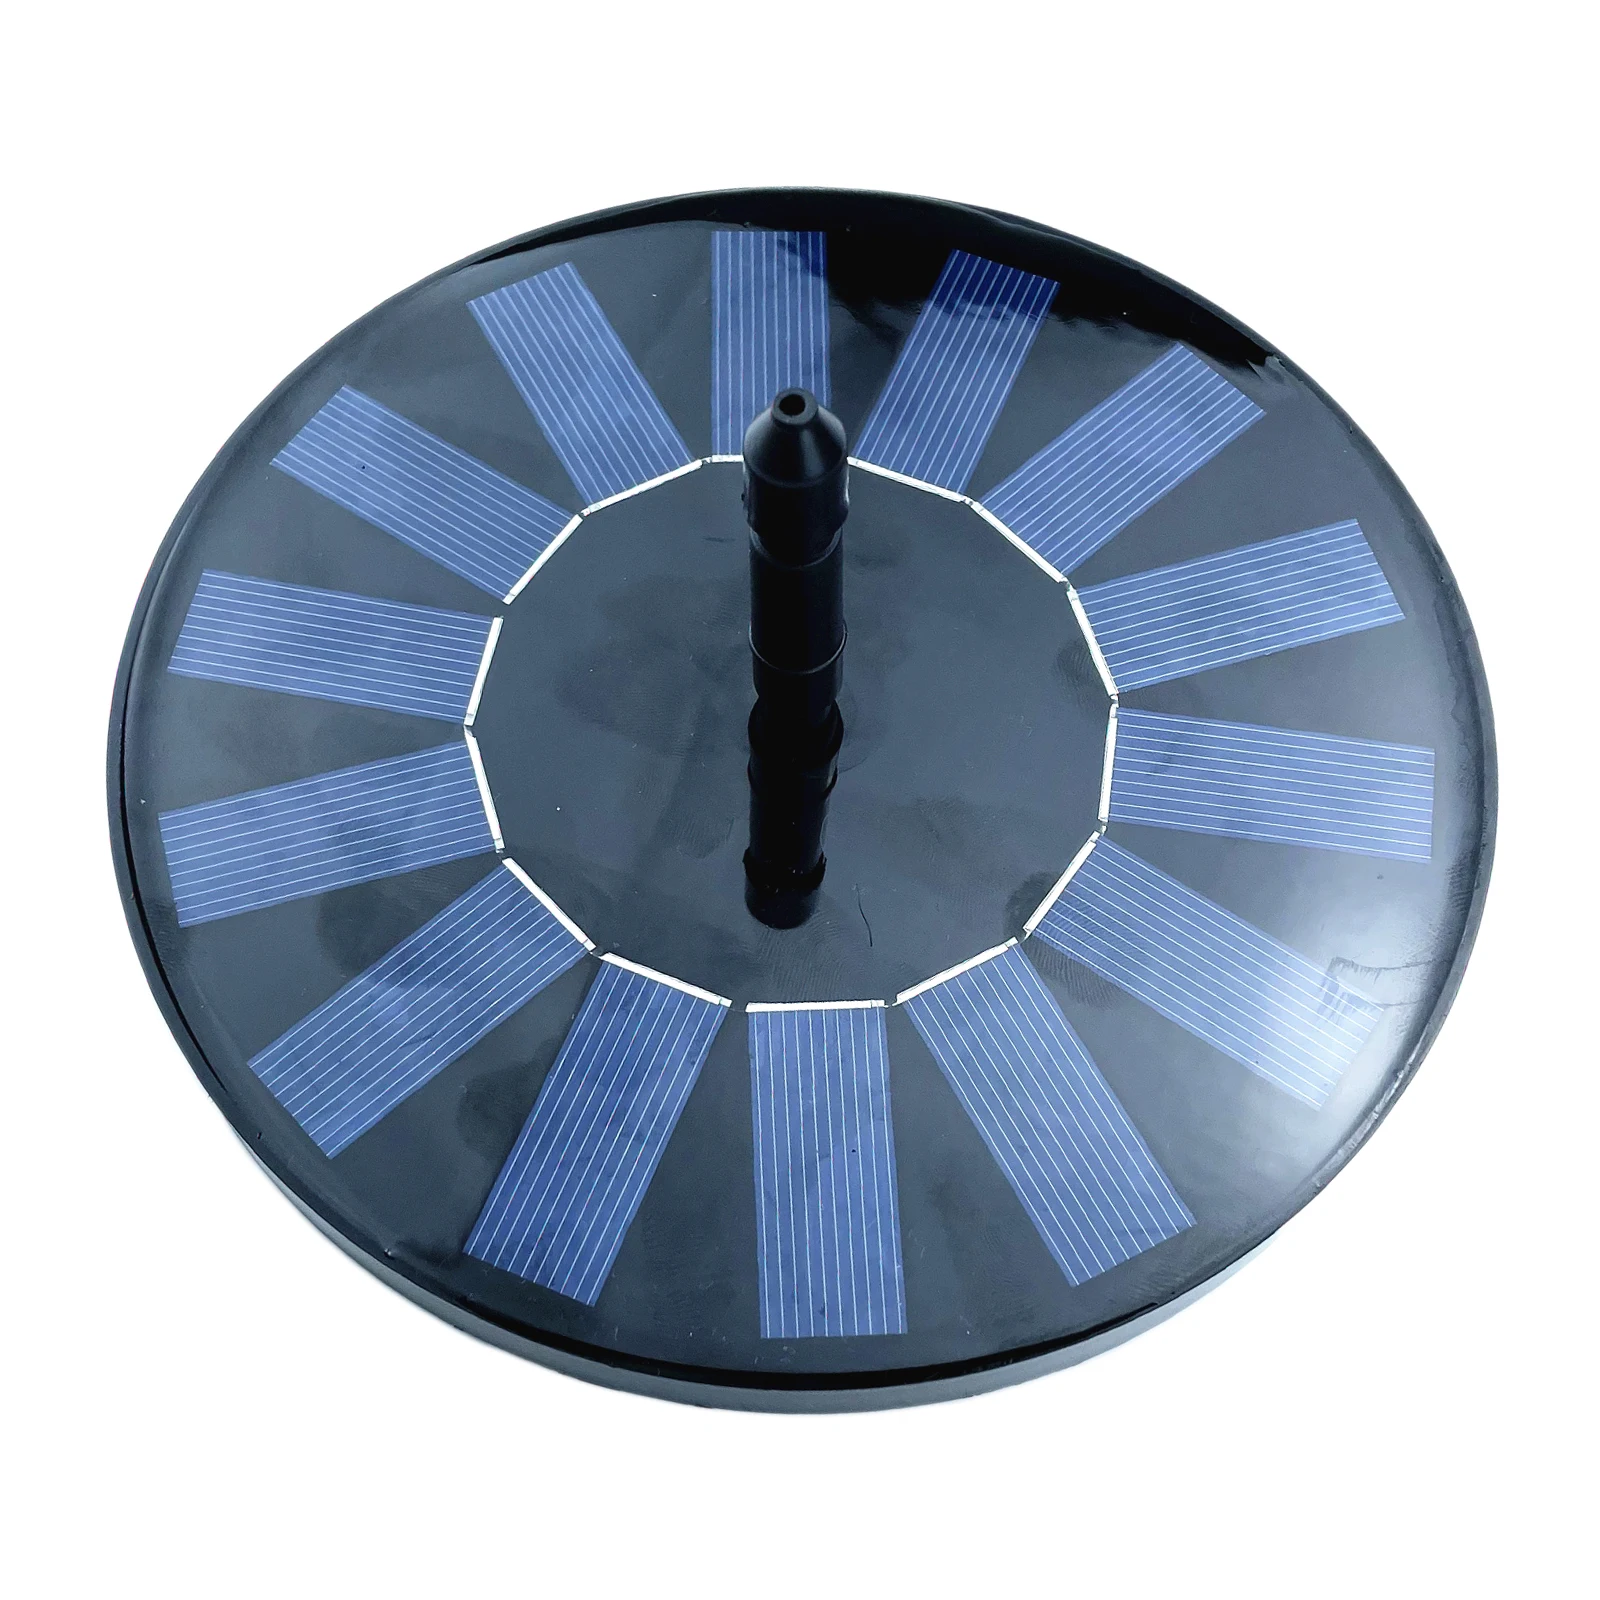 Floating Solar Fountain Water Fountain Decoration Pool Pond Solar Panel Powered Water Pump for Outdoor Garden Patio Fish Tank